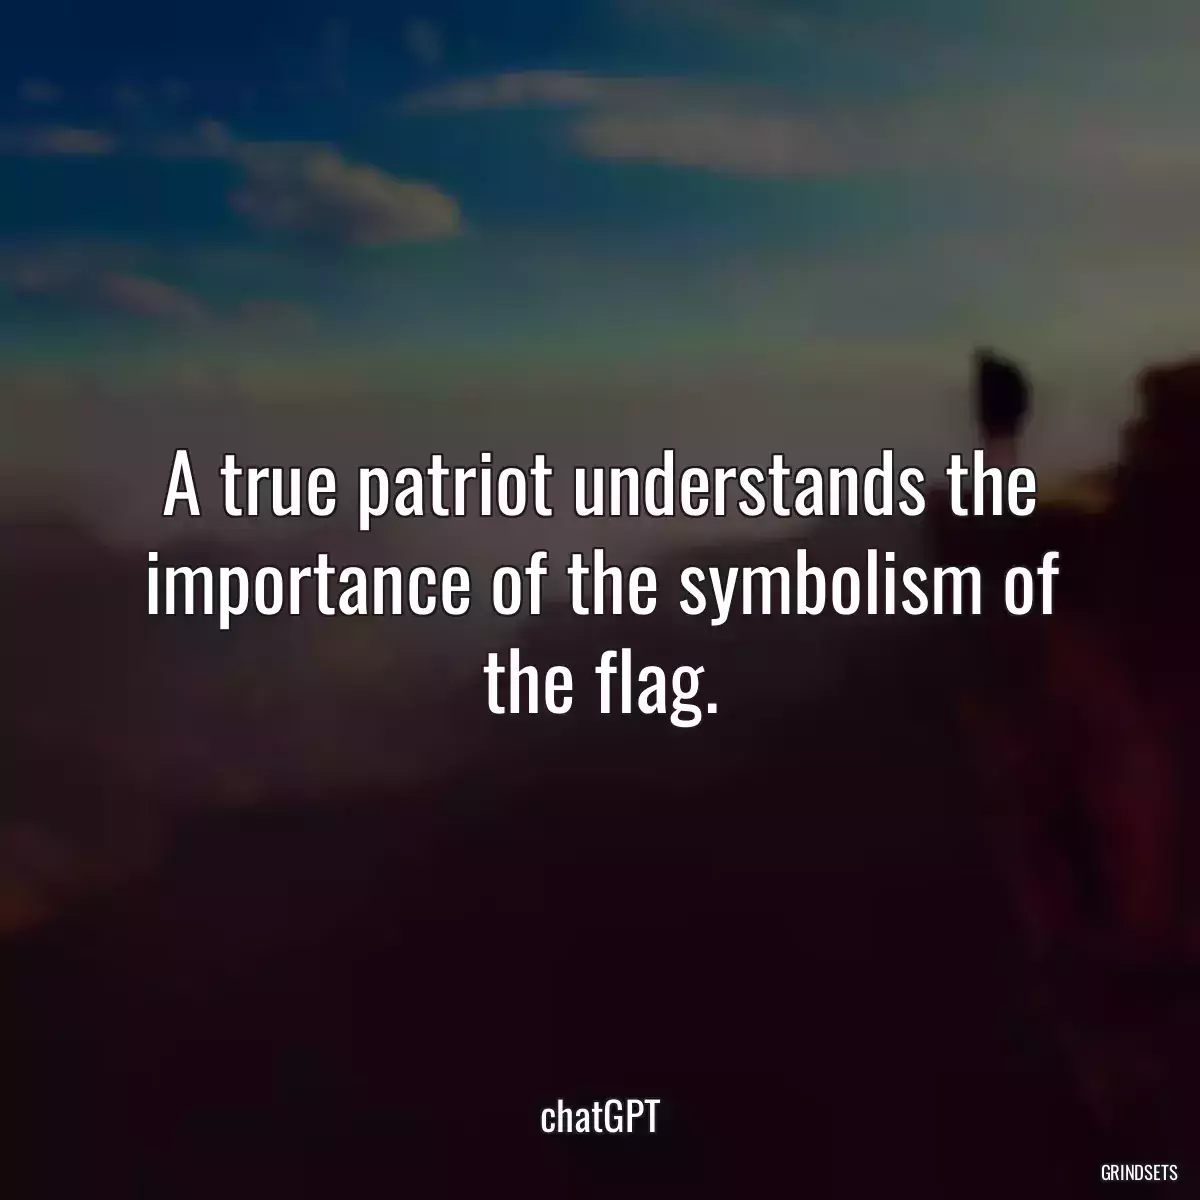 A true patriot understands the importance of the symbolism of the flag.